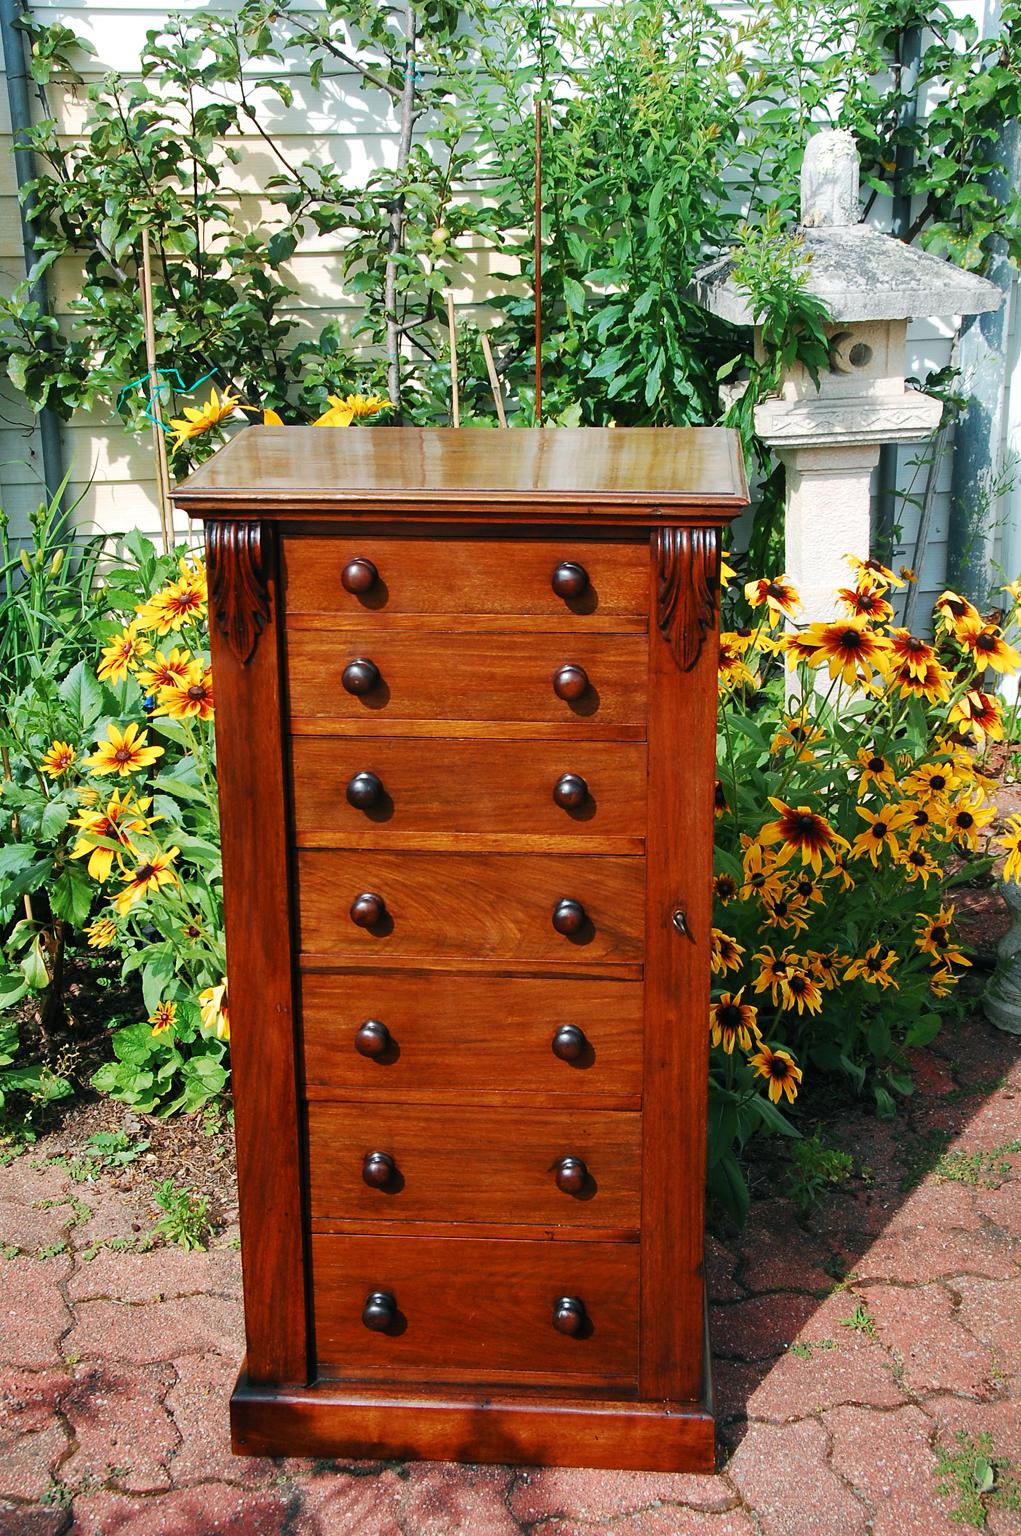 English mid 19th century walnut Wellington chest of seven graduated drawers. The Wellington chests are distinguished by having a locking bar on the front, usually right hand side, that hinges outward. When it is closed, it overlaps the edges of all